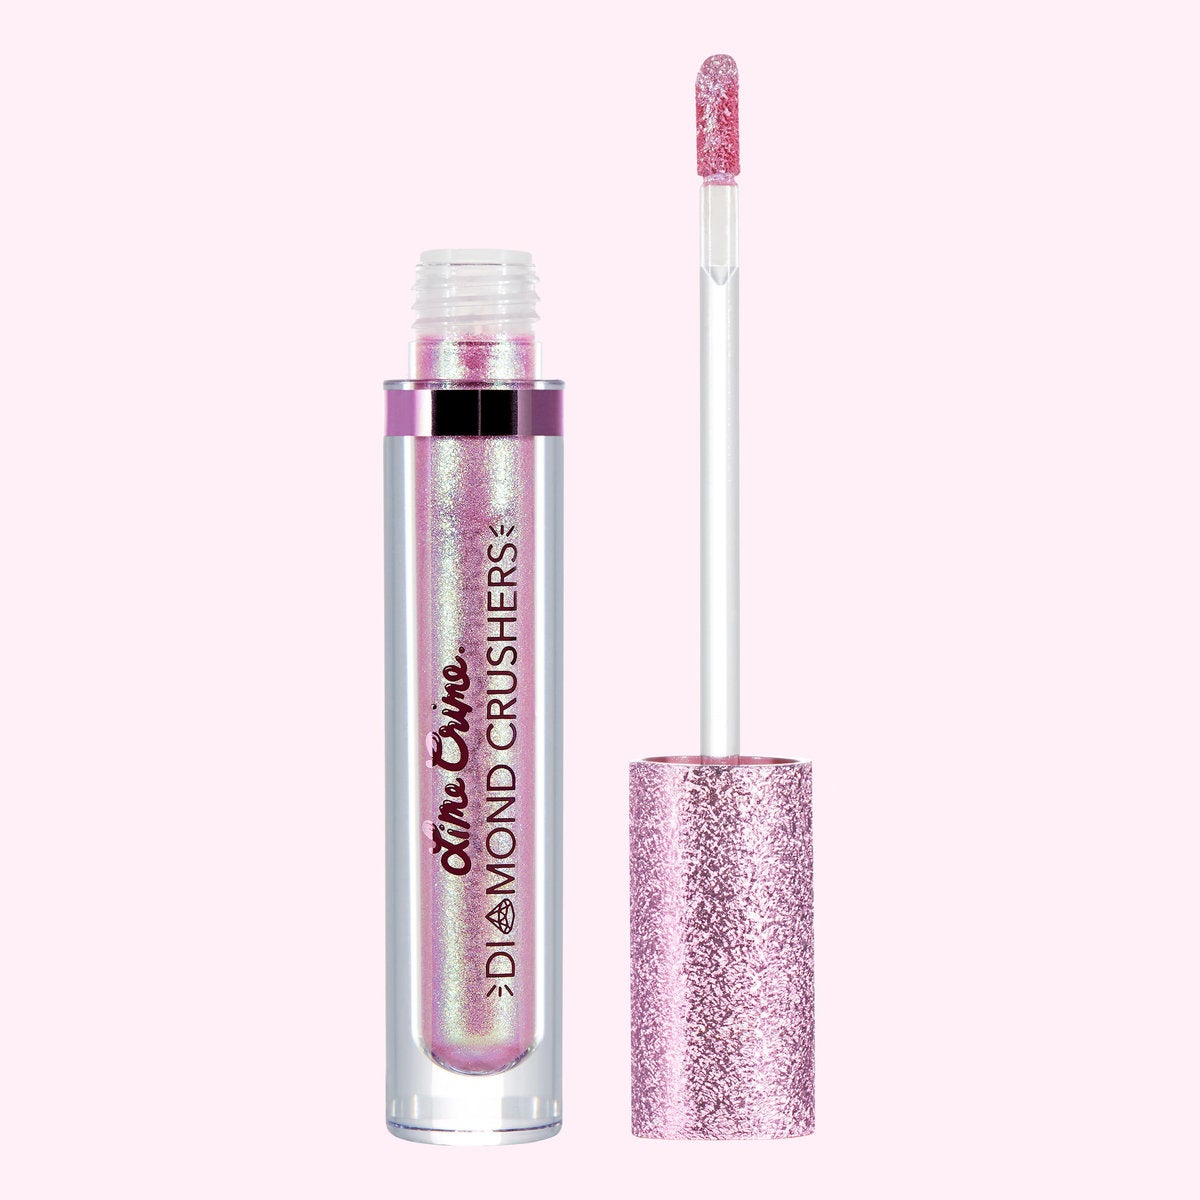 Get Your Pout Holiday Ready With These Sparkly And Festive Lippies